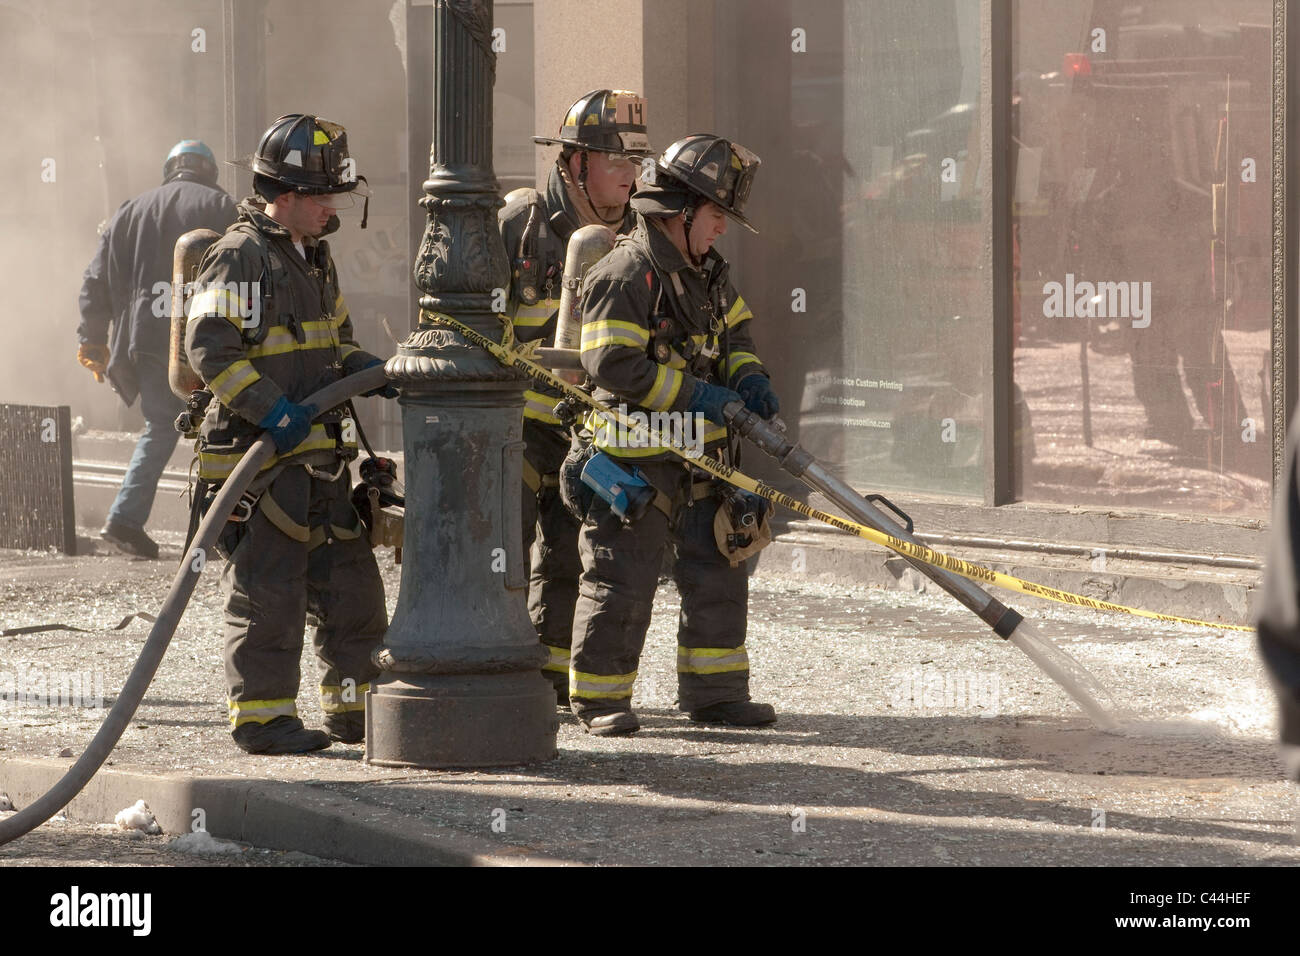 Emergency services attend the scene of an explosion in a building at 20'th street in New York City. Stock Photo